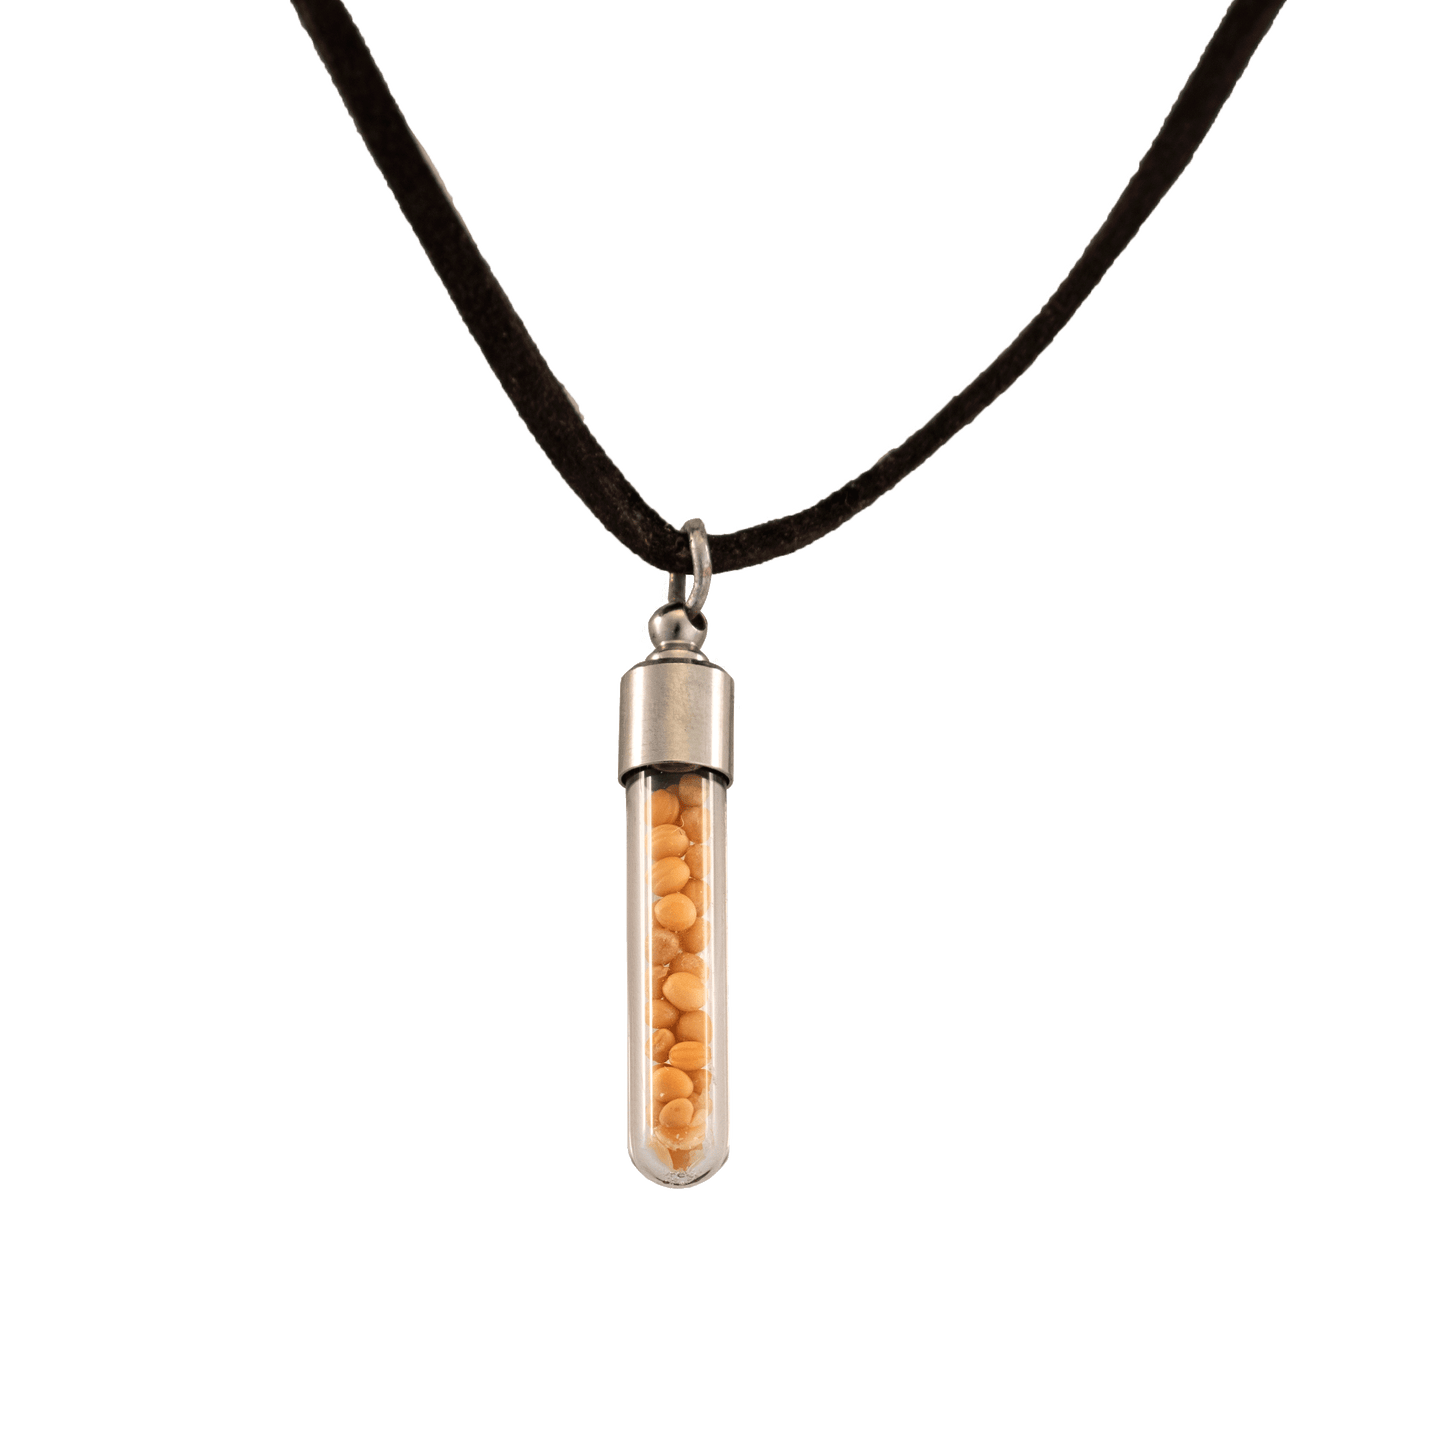 Clear vial holding mustard seeds pendant on a black cord